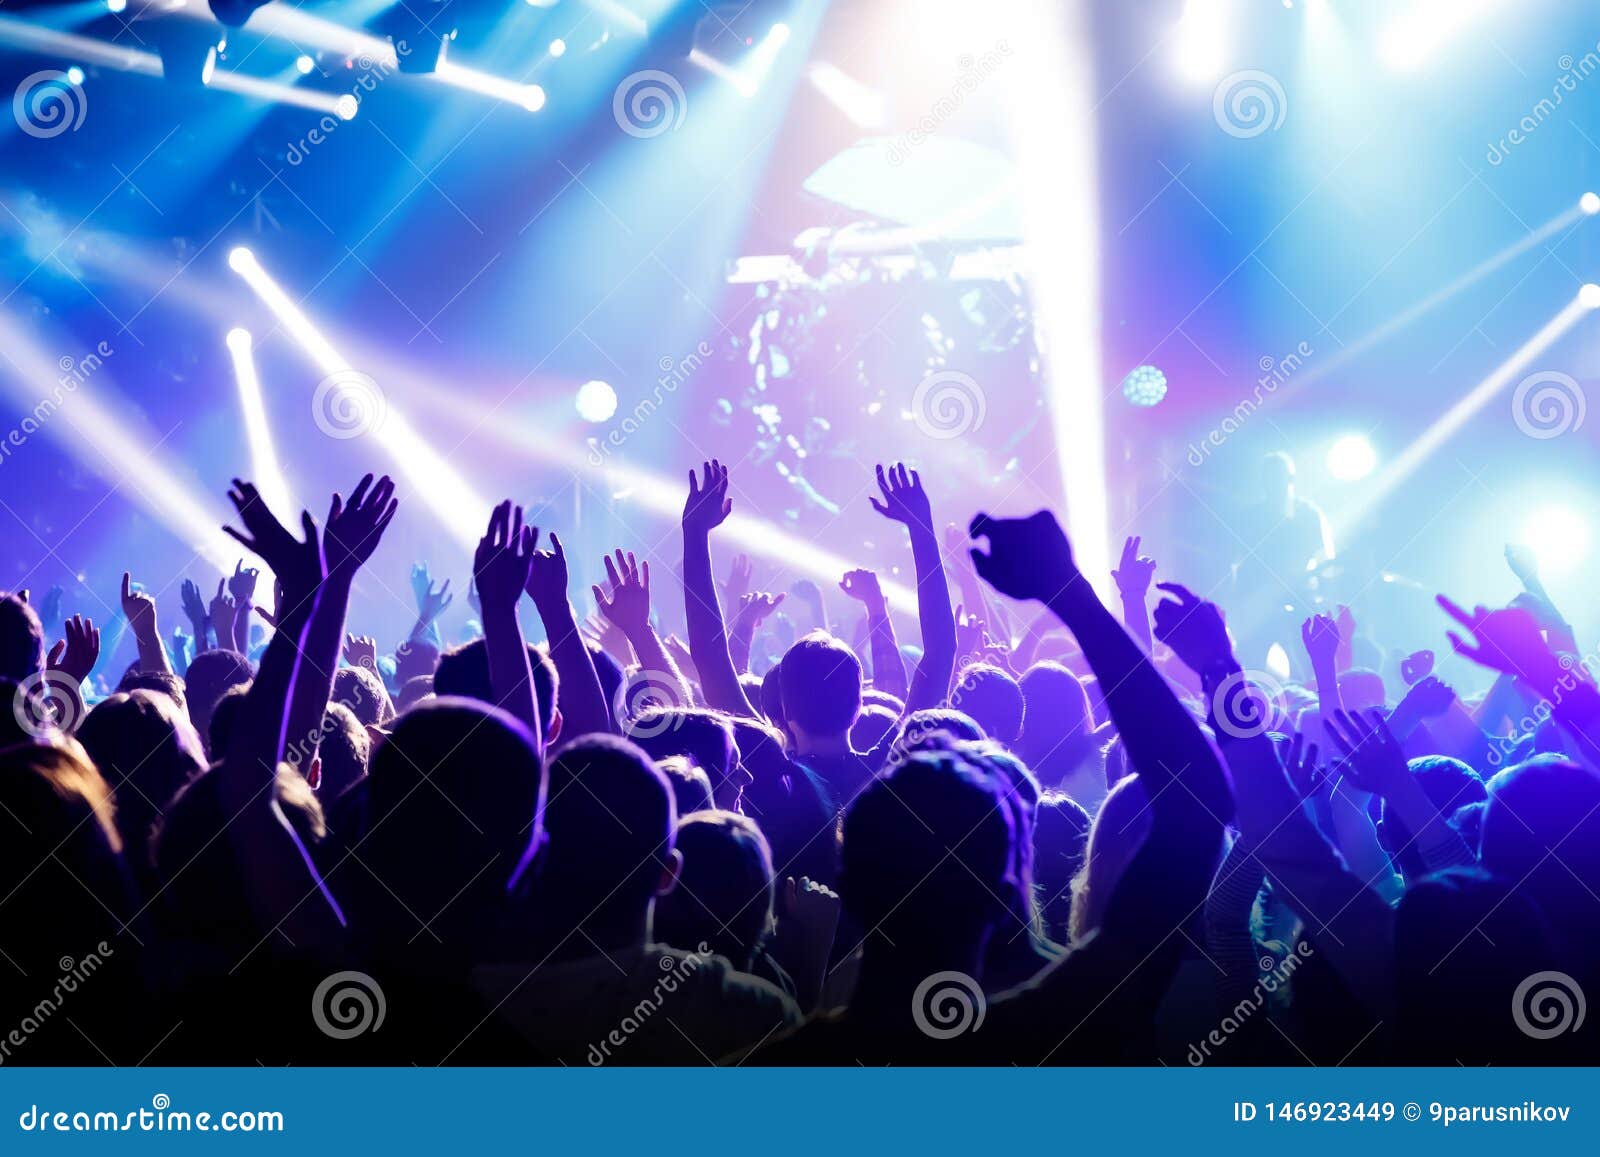 Raised Hands in Honor of a Musical Show on Stage Stock Image - Image of ...